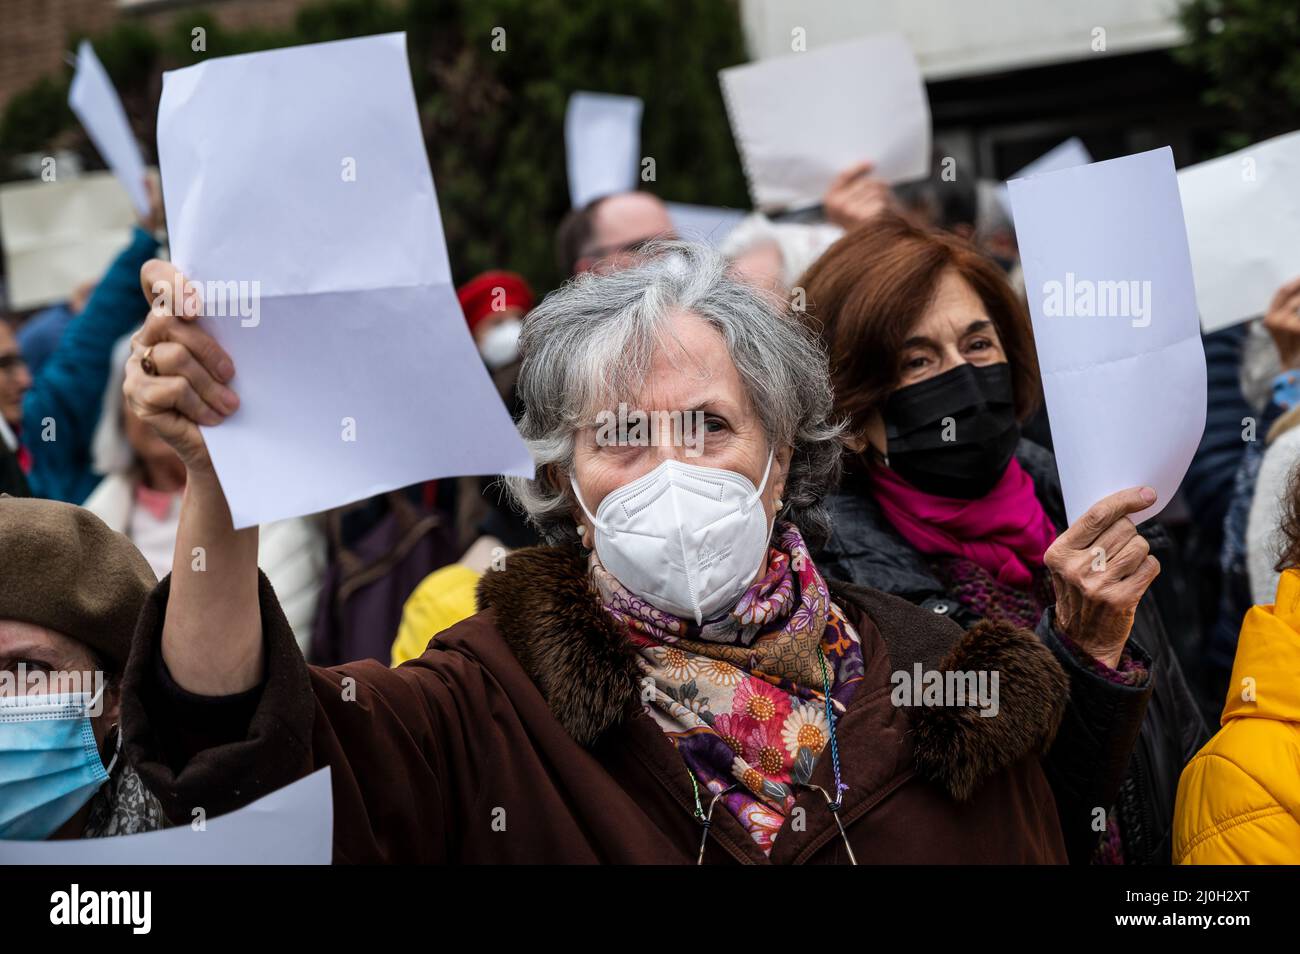 Madrid, Spain. 19th Mar, 2022. People carrying white papers are seen during a protest in front of the Russian embassy. People gathered to protest against the Russian invasion of Ukraine carrying white papers in support of the Russian citizens arrested for protesting in their country against the war in Ukraine. Credit: Marcos del Mazo/Alamy Live News Stock Photo